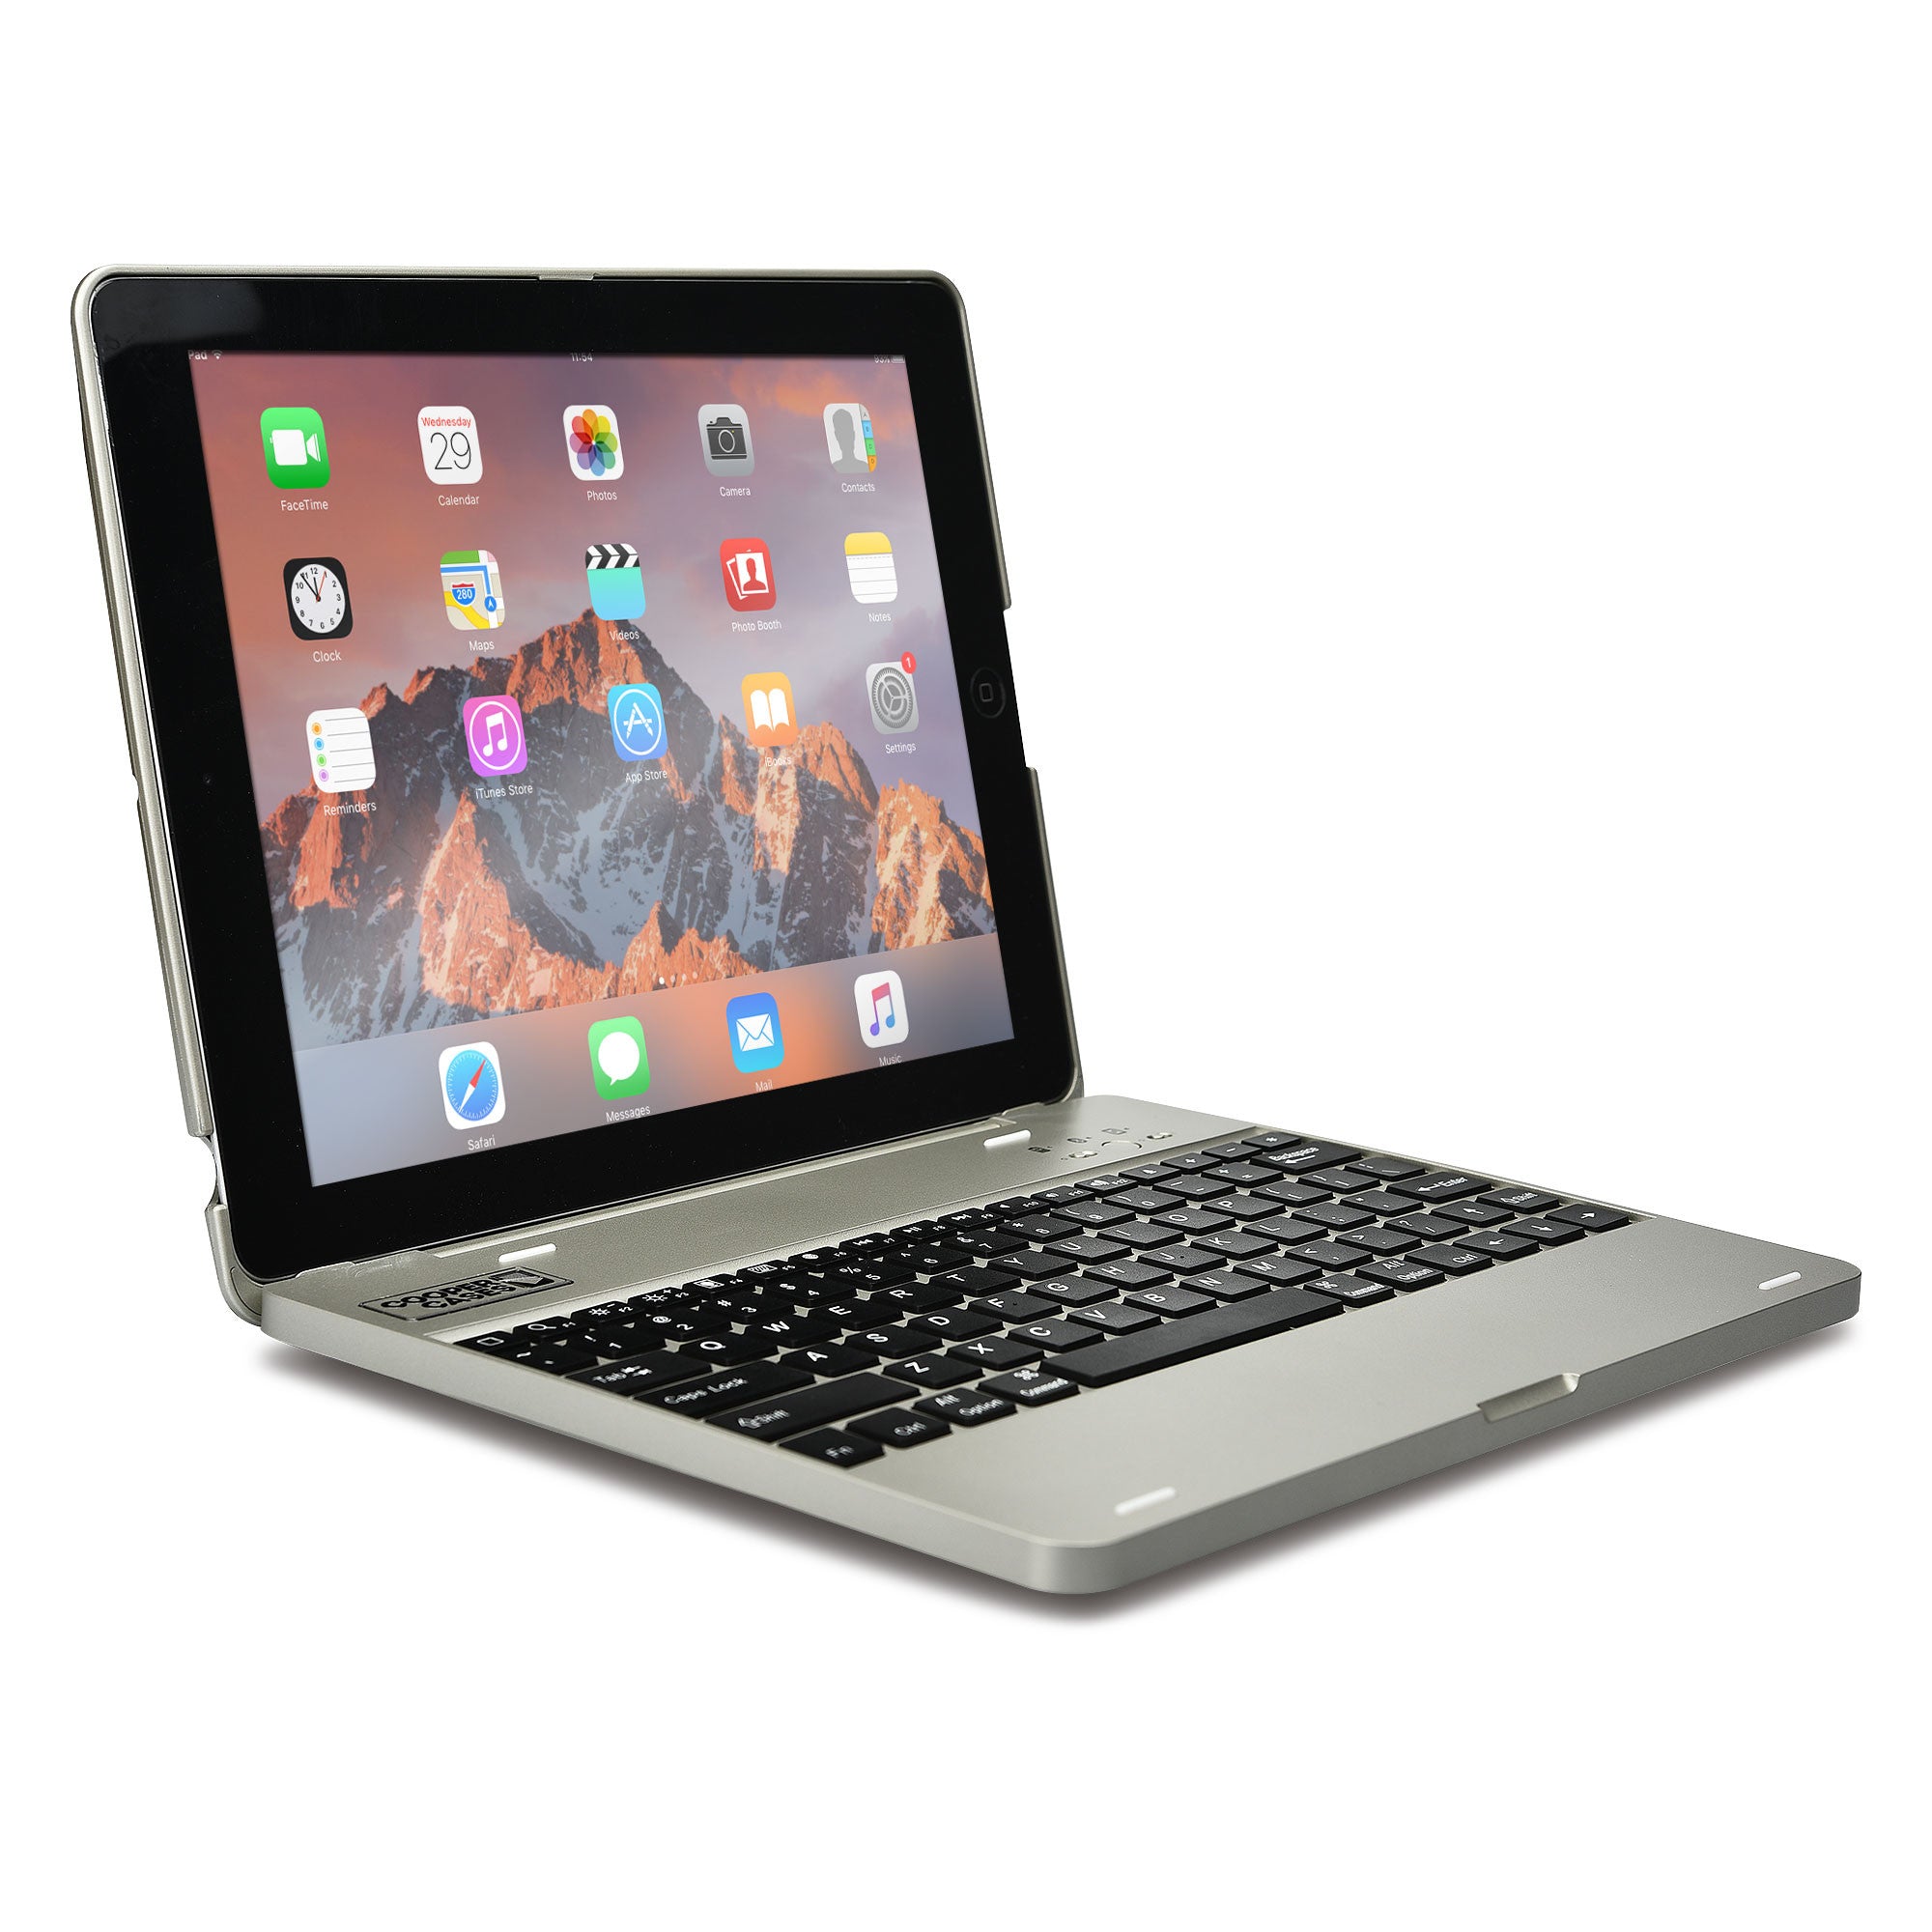 [LIQUIDATION] Cooper Kai Skel P1 Clamshell Keyboard Case with Built-in Powerbank for Apple iPad 2/3/4